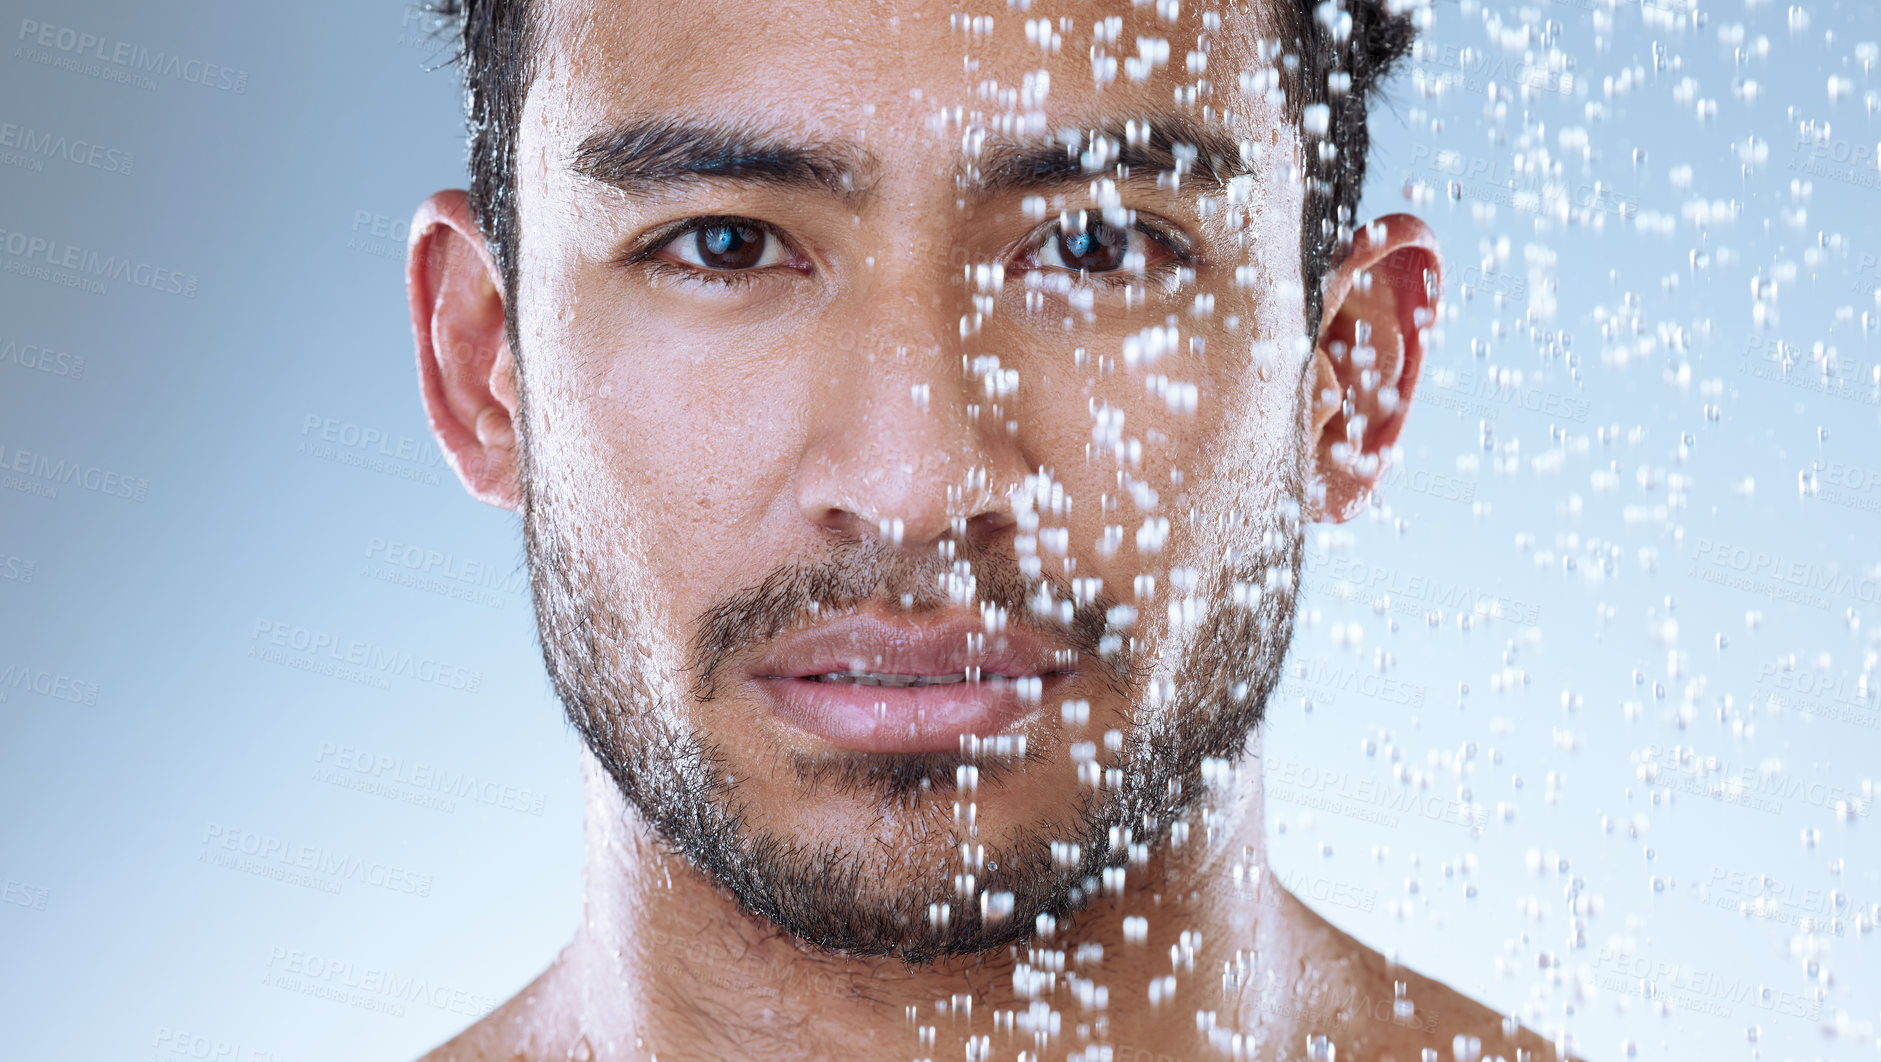 Buy stock photo Studio portrait of a handsome young man taking a shower against a grey background